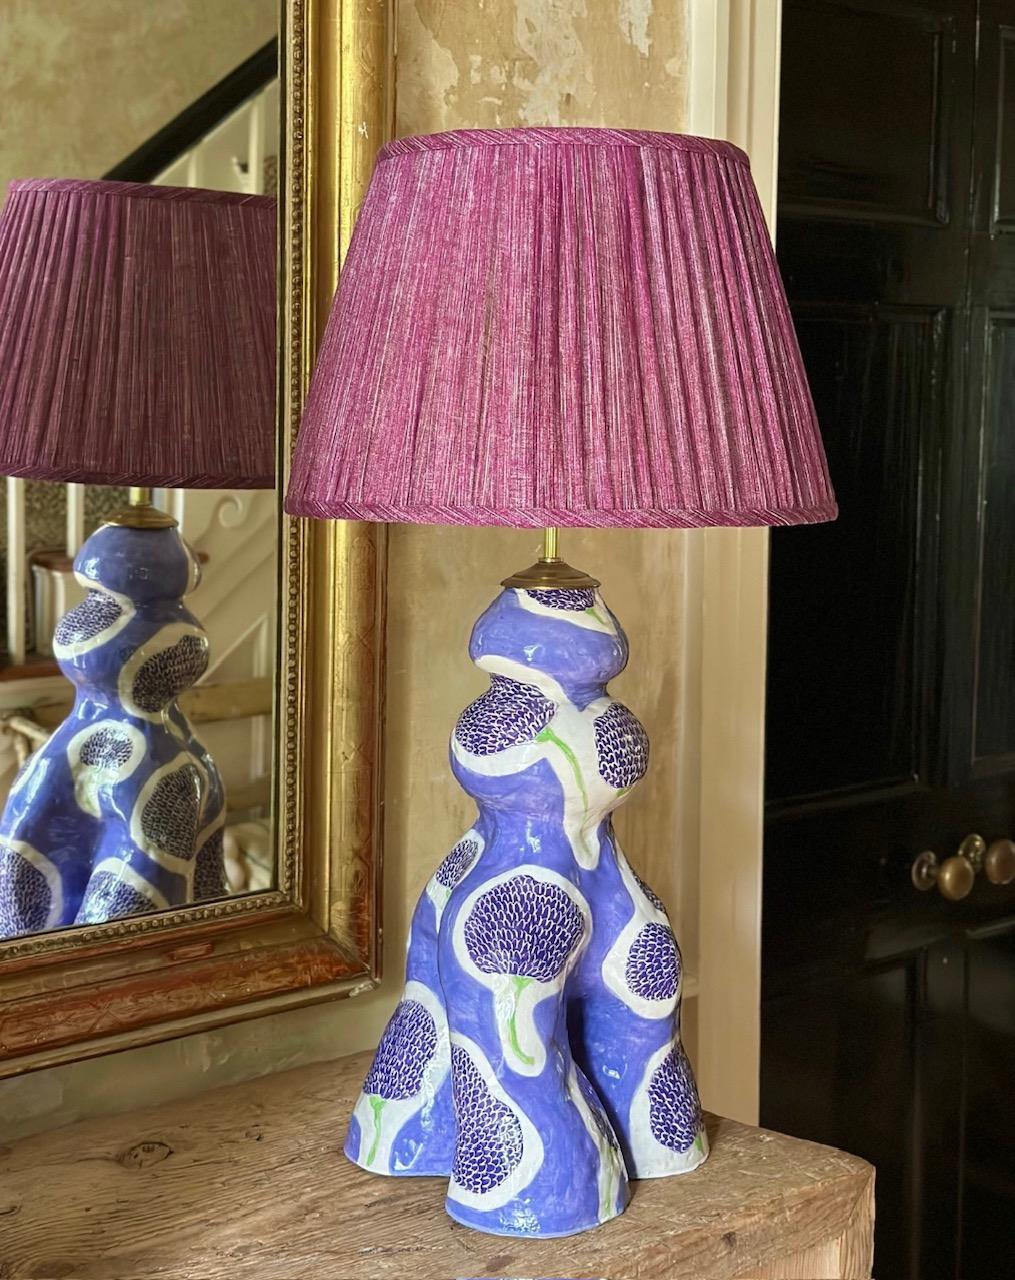 Studio-made, hand-built, curvaceous ceramic lamp form painted in two shades of purple and incised in a whimsical marigold pattern. 

Background in lilac and flowers in a deeper amethyst with spring-green stem. The form is triple-legged at the